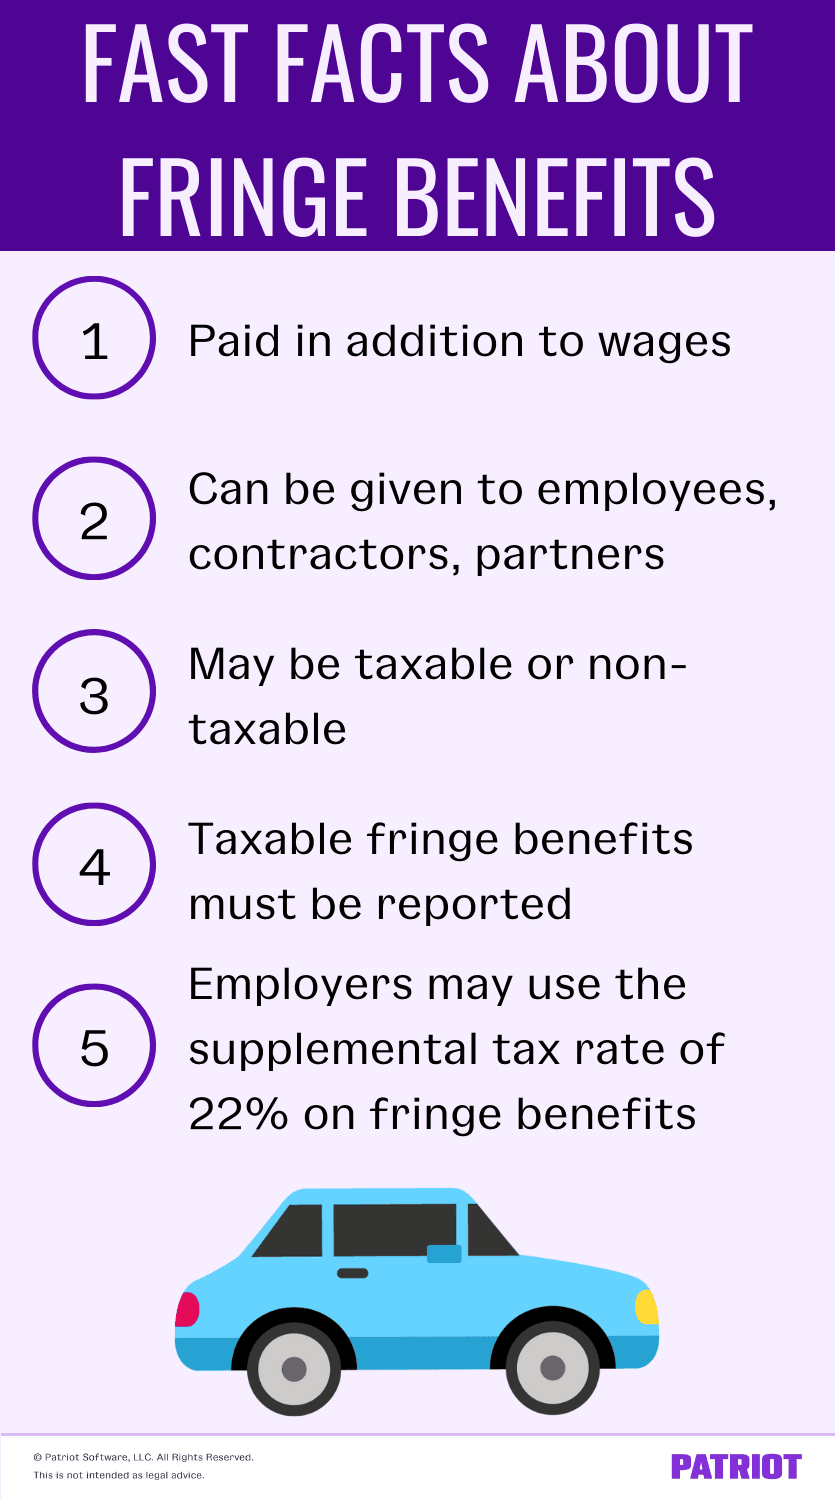 Fast facts about fringe benefits include that they are paid in addition to wages; can be given to employees, contractors, and partners; may be taxable or non-taxable; taxable fringe benefits must be reported; and employers may use the supplemental tax rate of 22% on fringe benefits. 